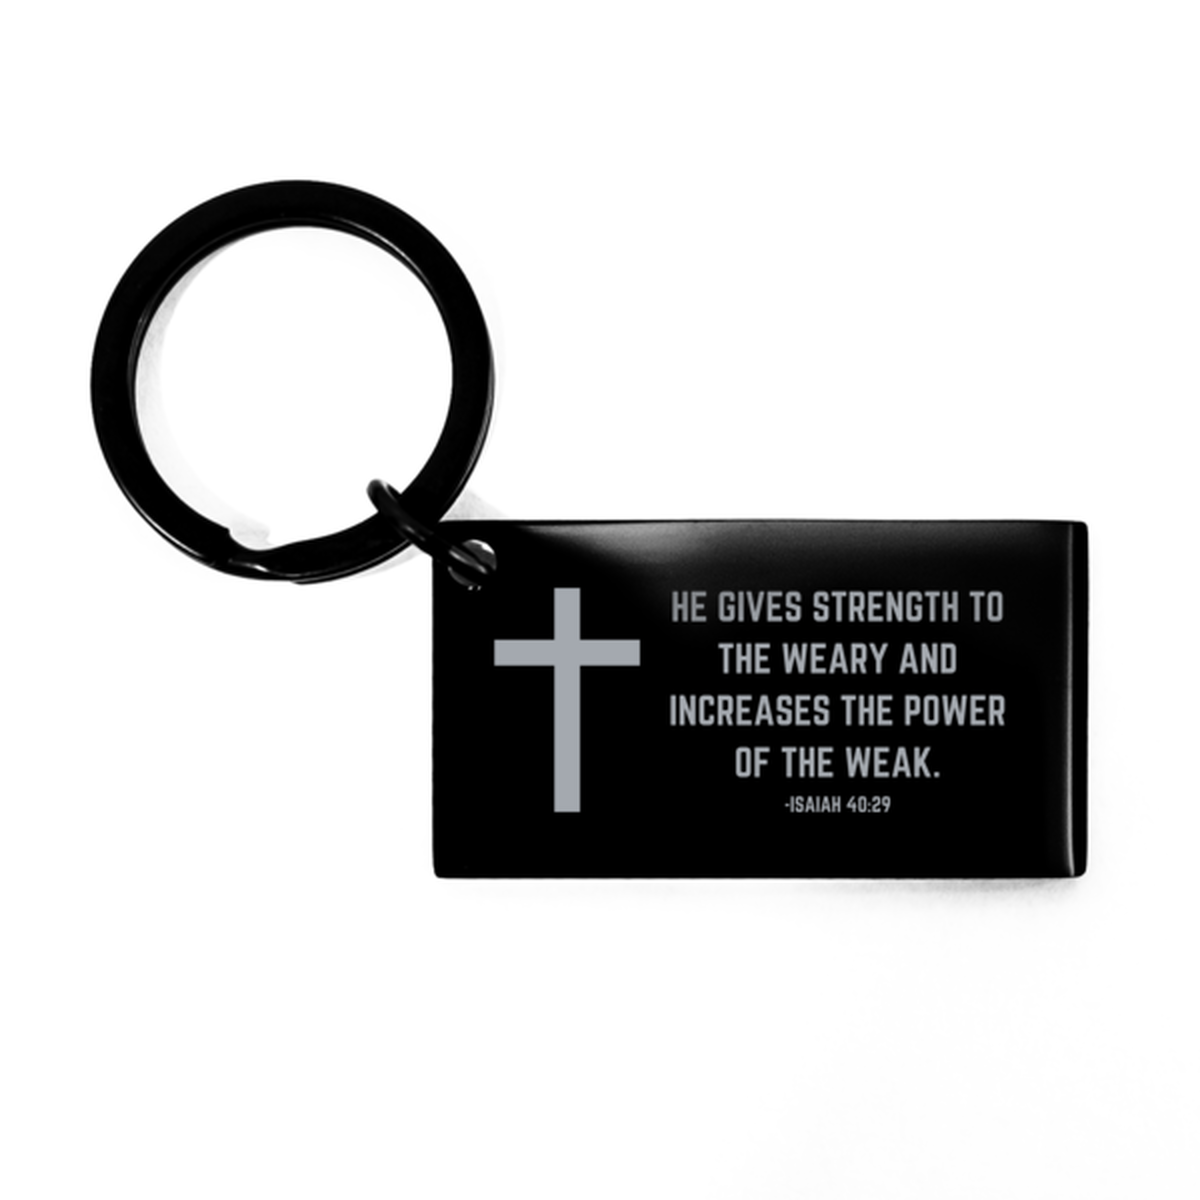 Baptism Gifts For Teenage Boys Girls, Christian Bible Verse Black Keychain, He gives strength to the weary, Confirmation Gifts, Bible Verse Keyring for Son, Godson, Grandson, Nephew